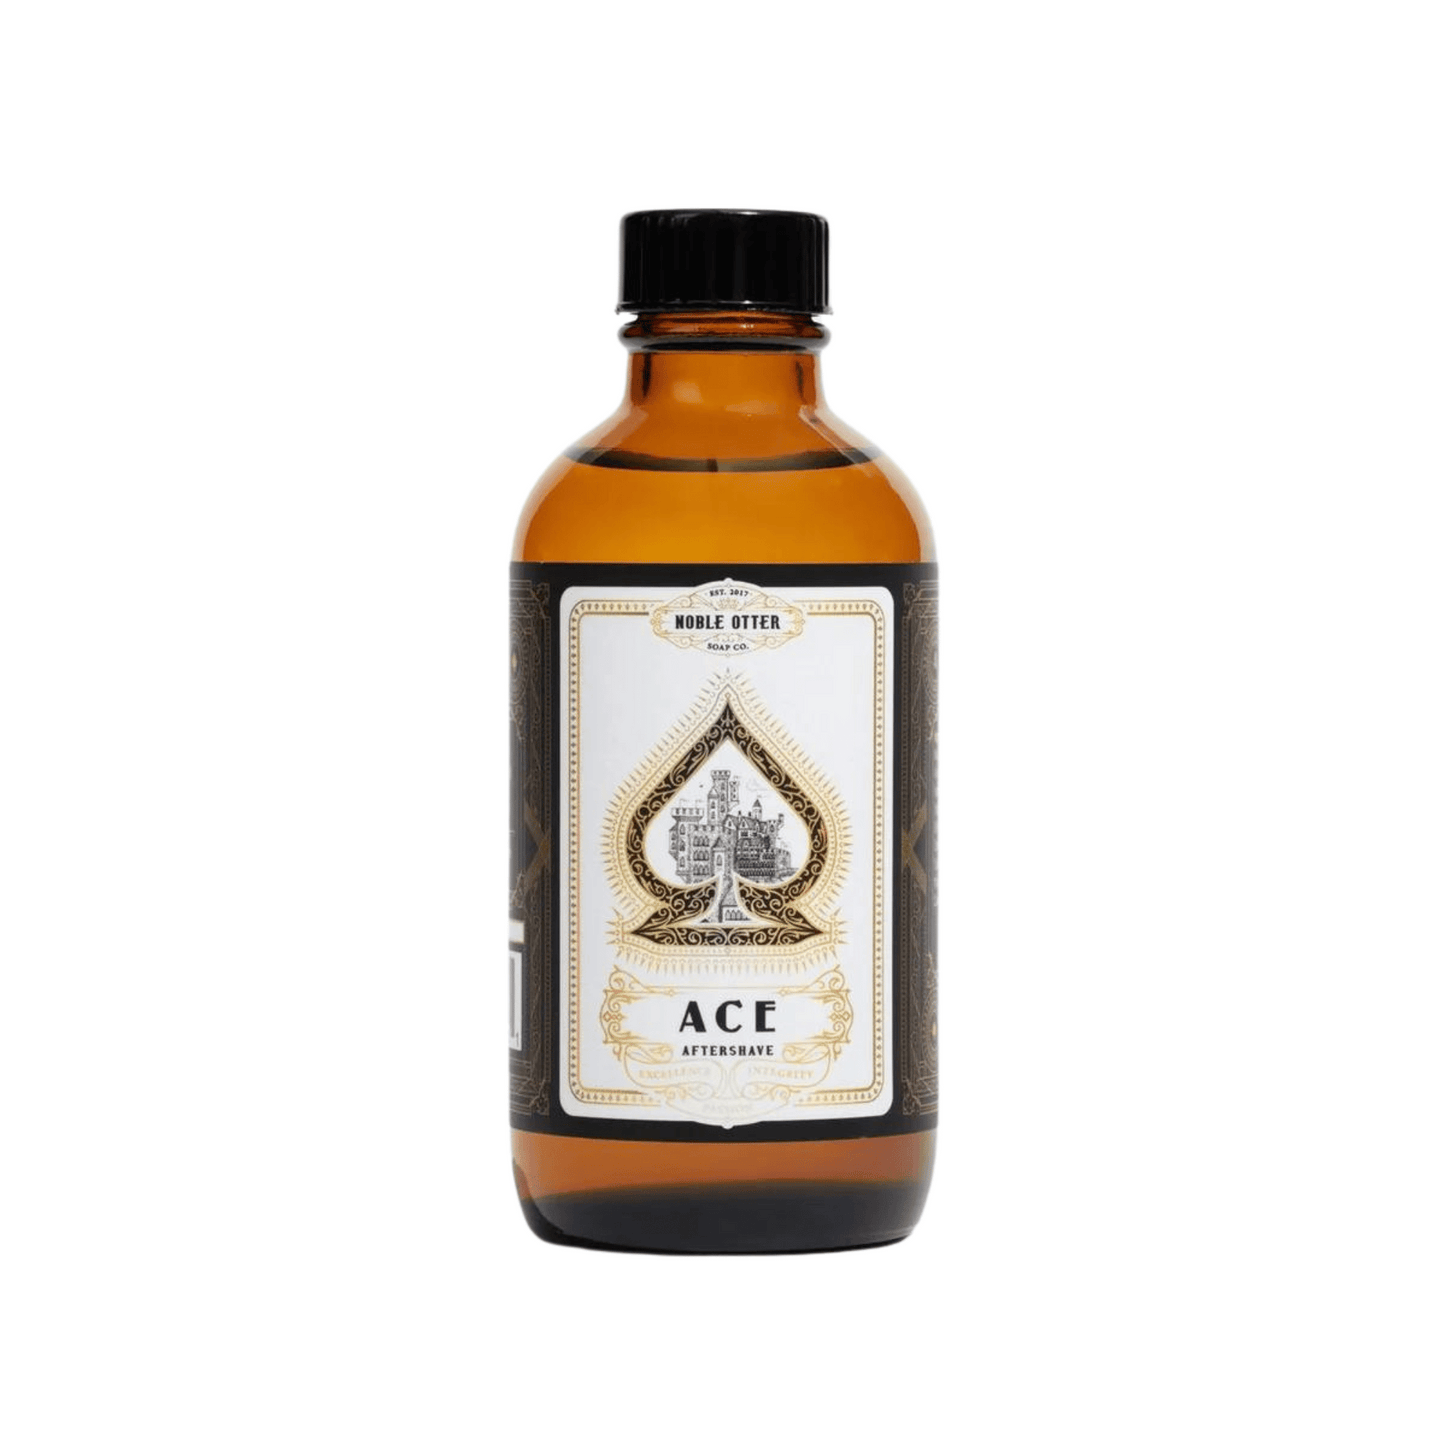 Primary Image of Ace Aftershave